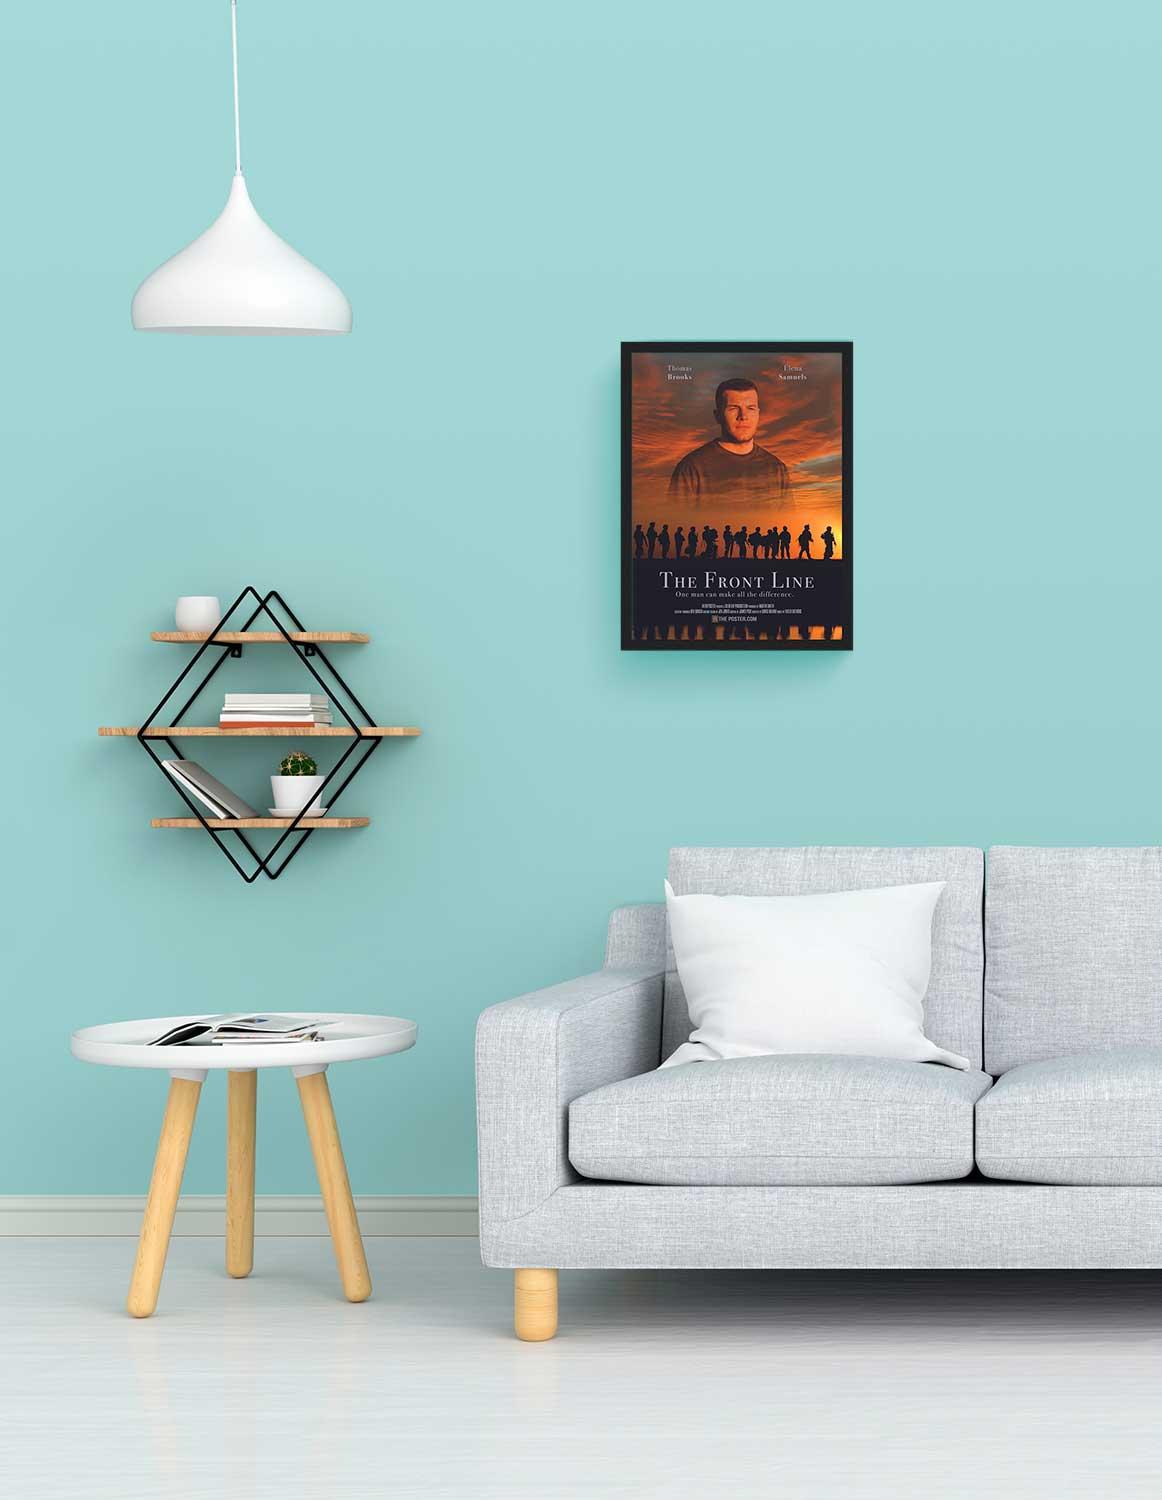 A war movie poster in a small black frame on the wall above a grey sofa